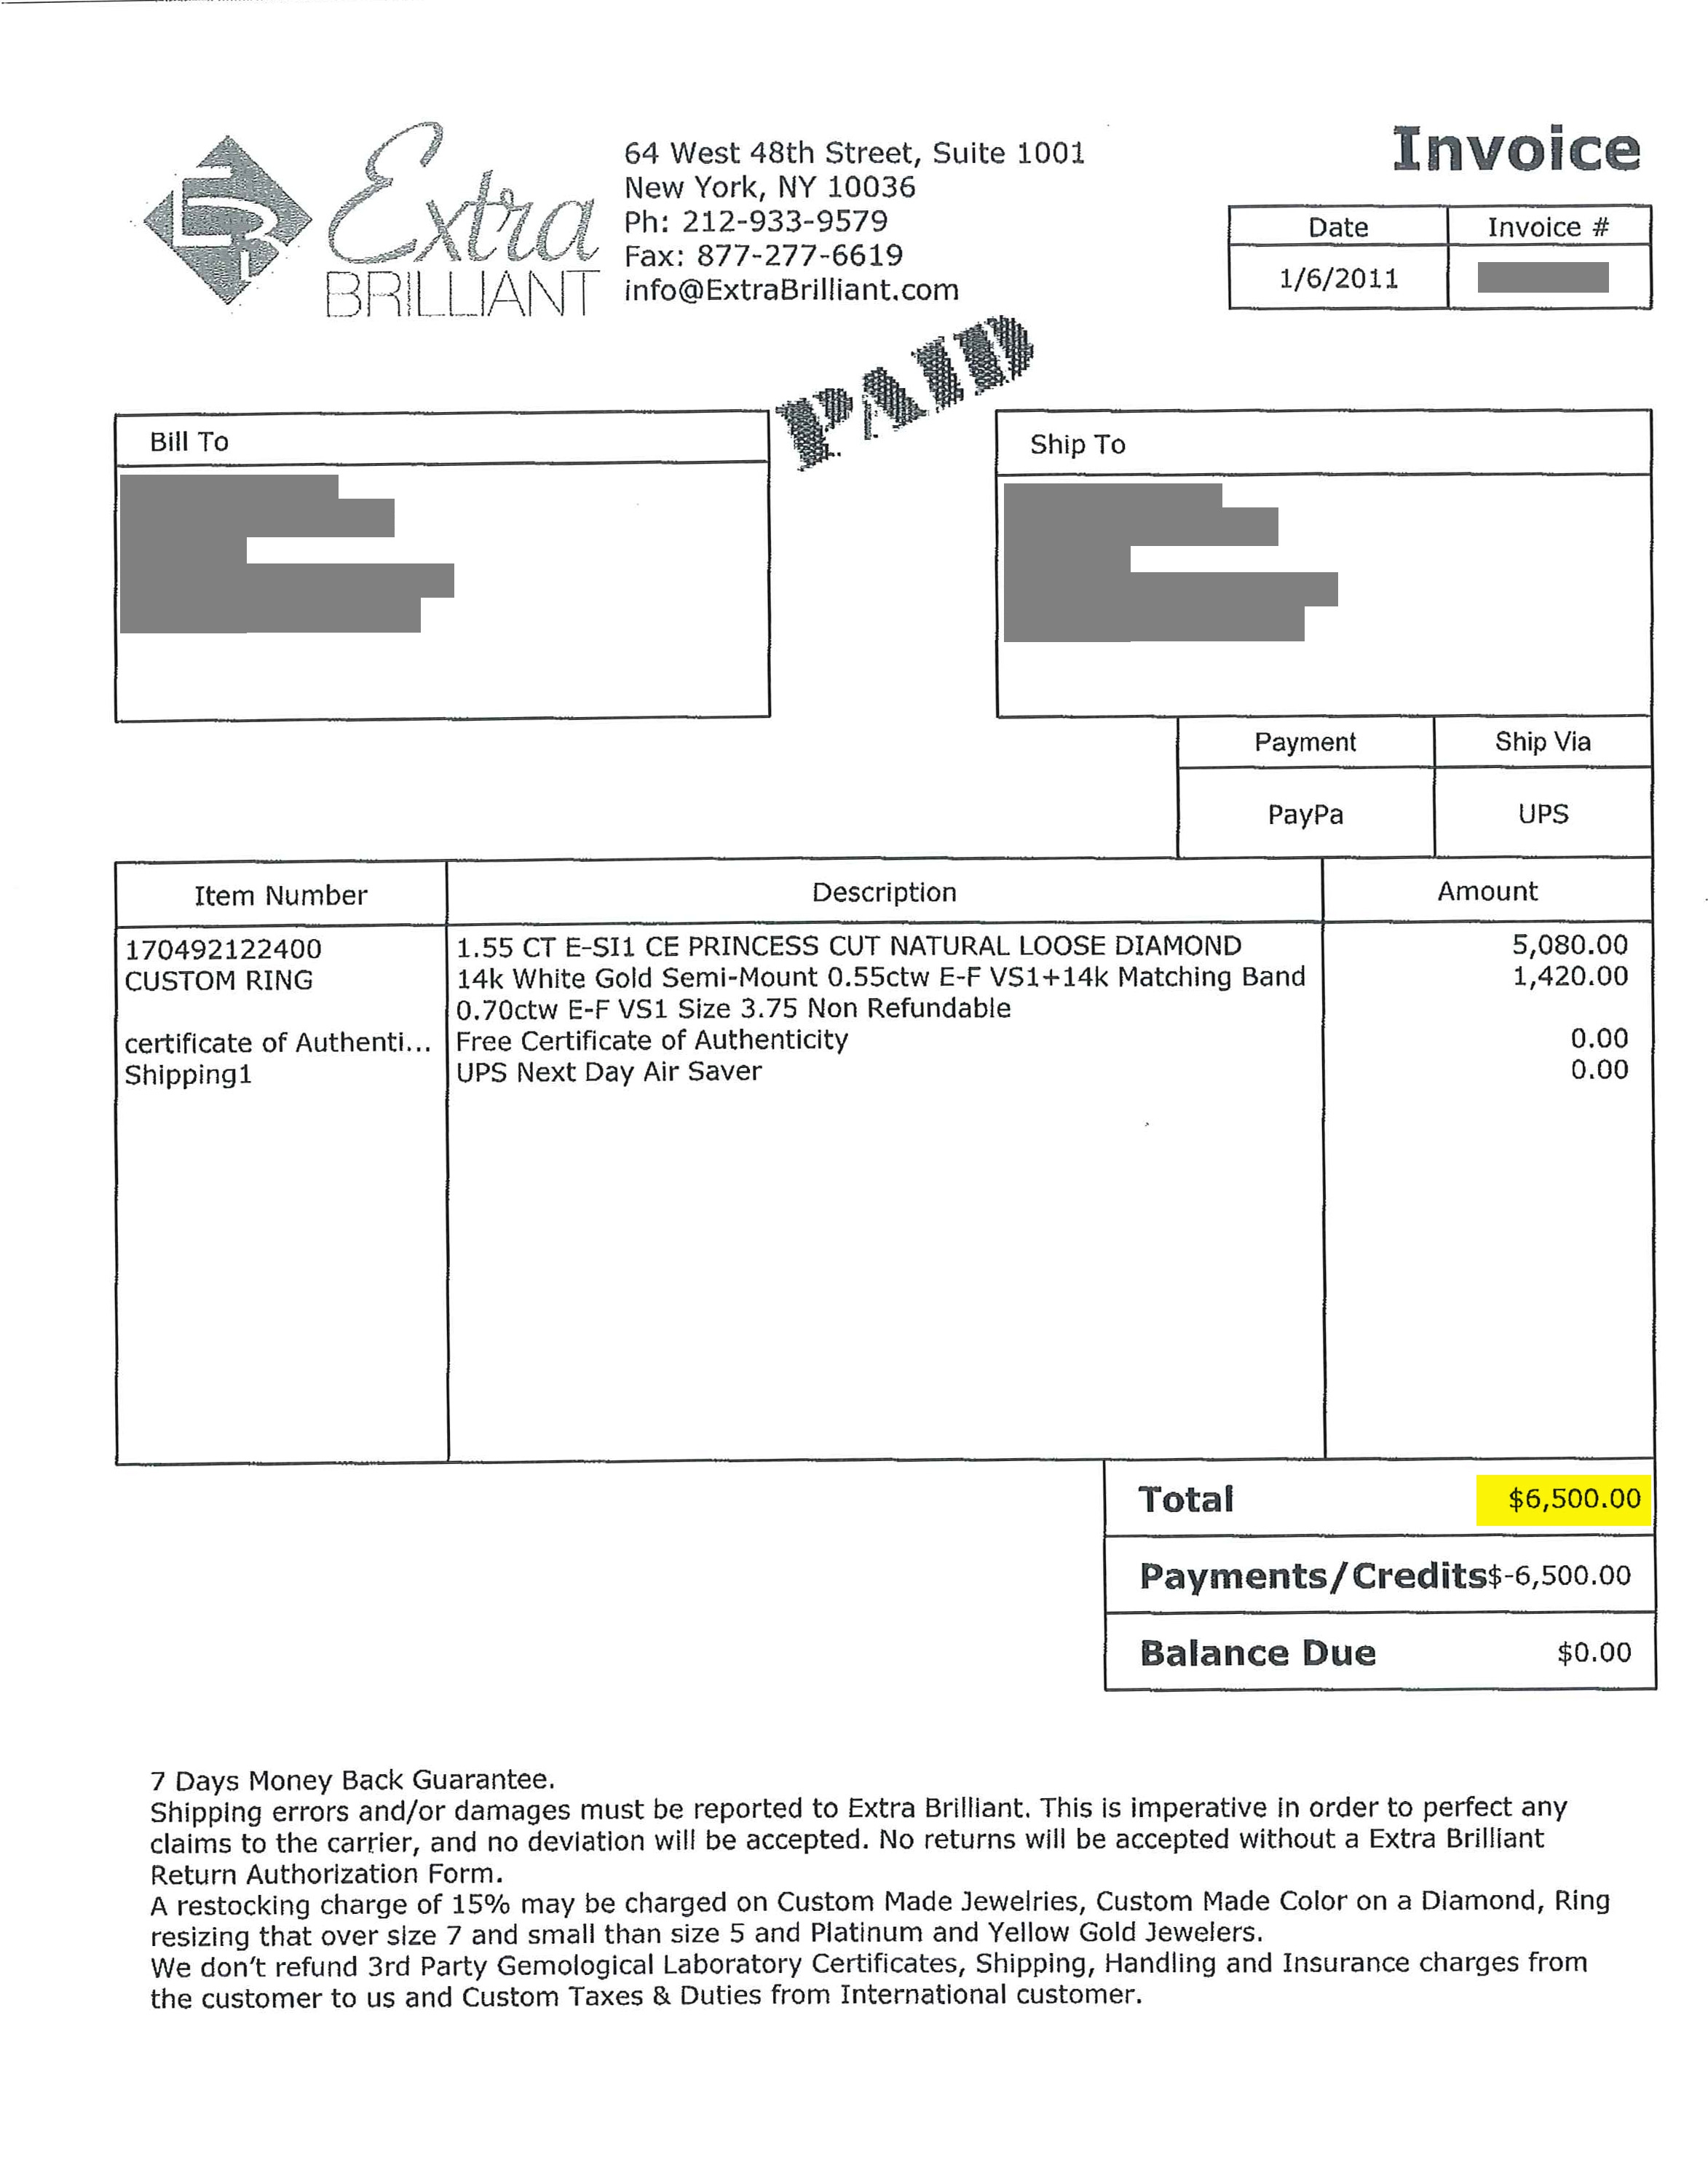 jcrs jewelry insurance issues sales receipt vs invoice